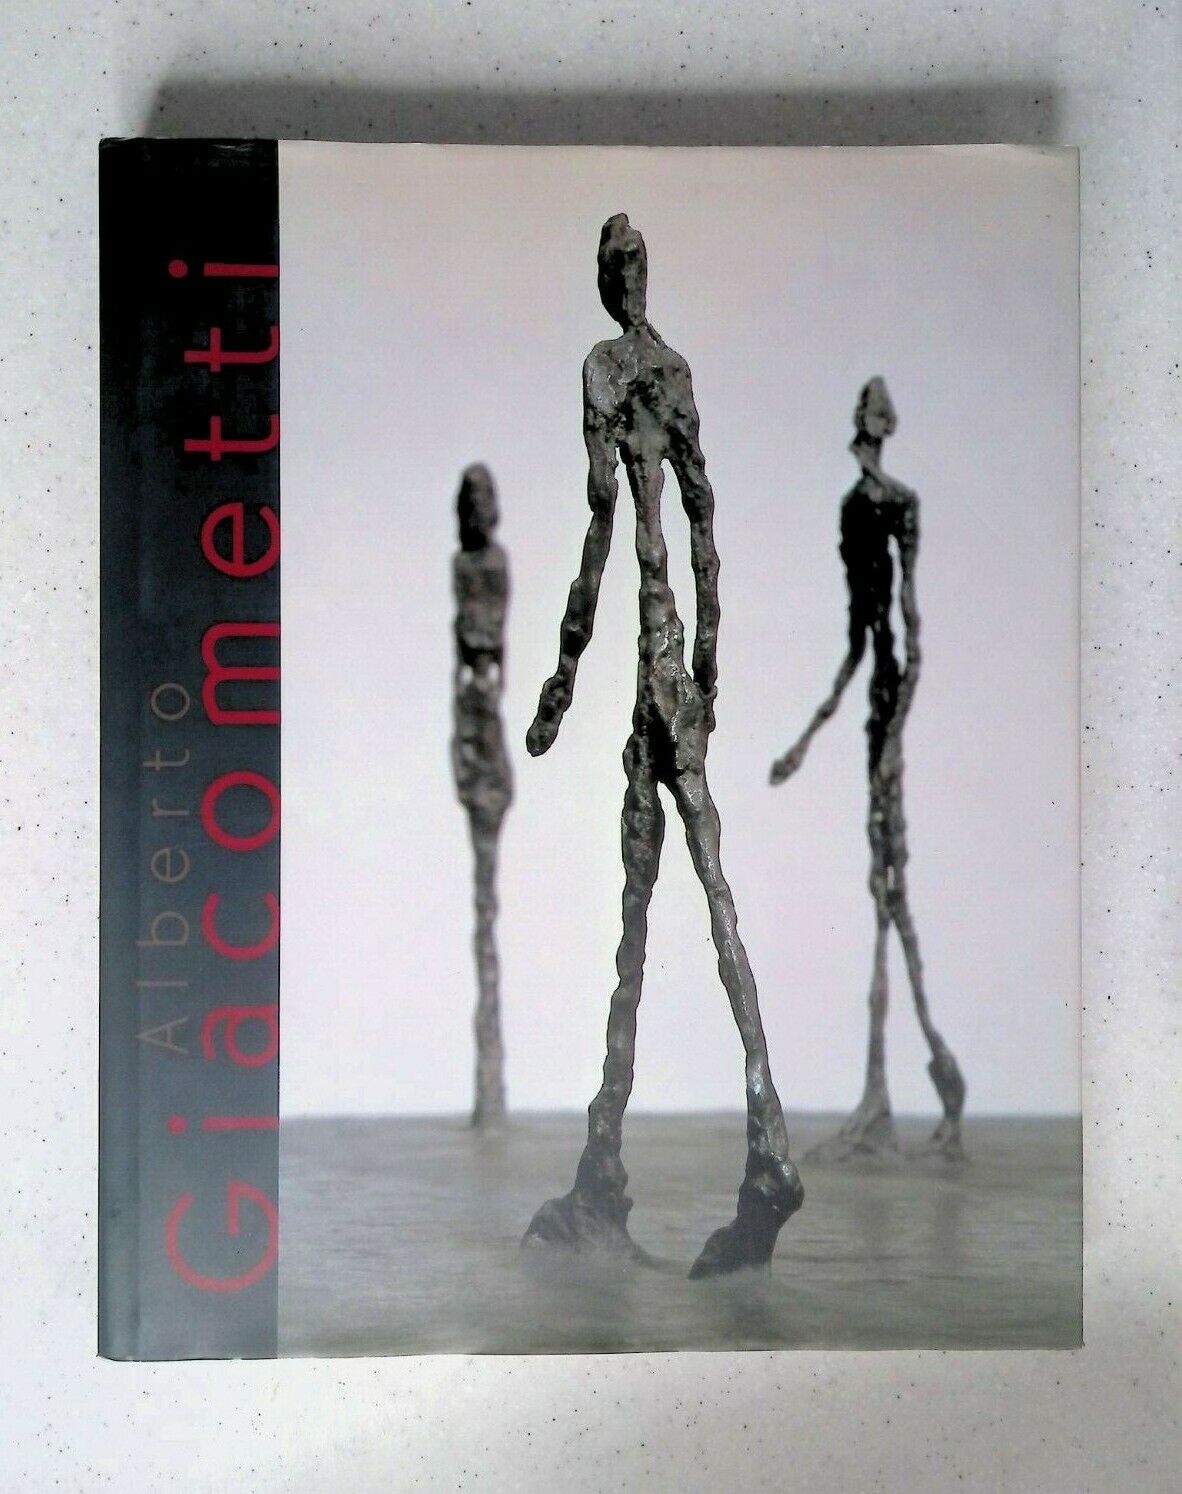 Alberto Giacometti by Christian Klemm, 1st Edition, Hardcover, 2001